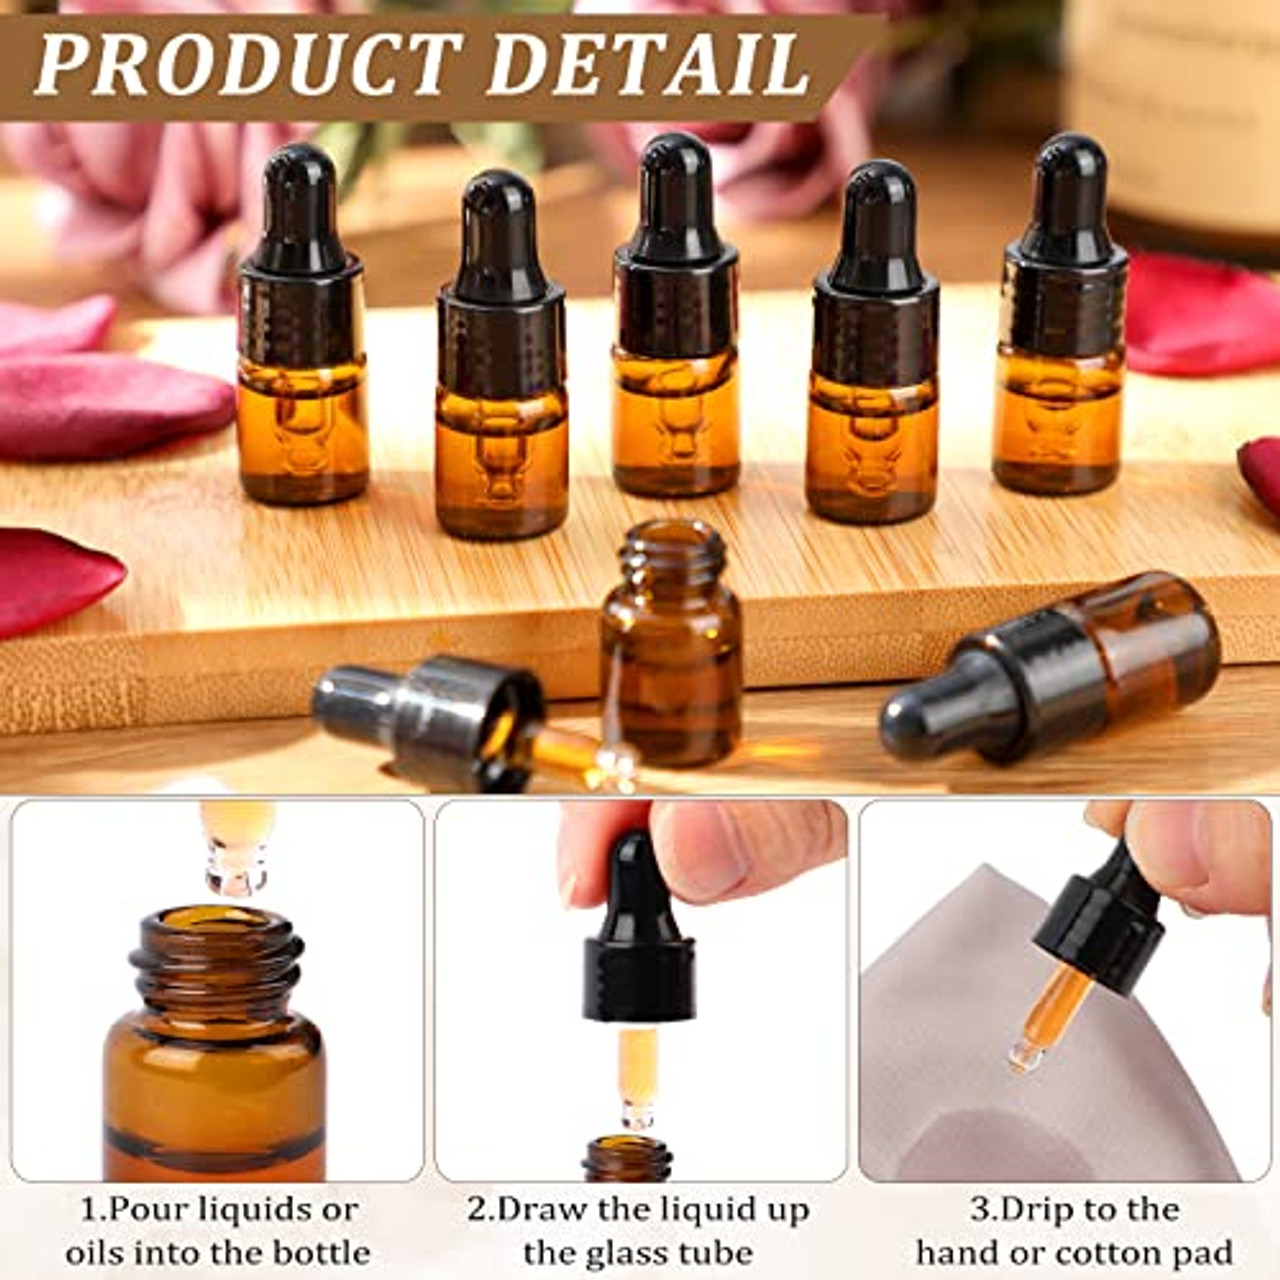 100Pcs Glass Essential Oil Bottles Fragrance with Caps Small